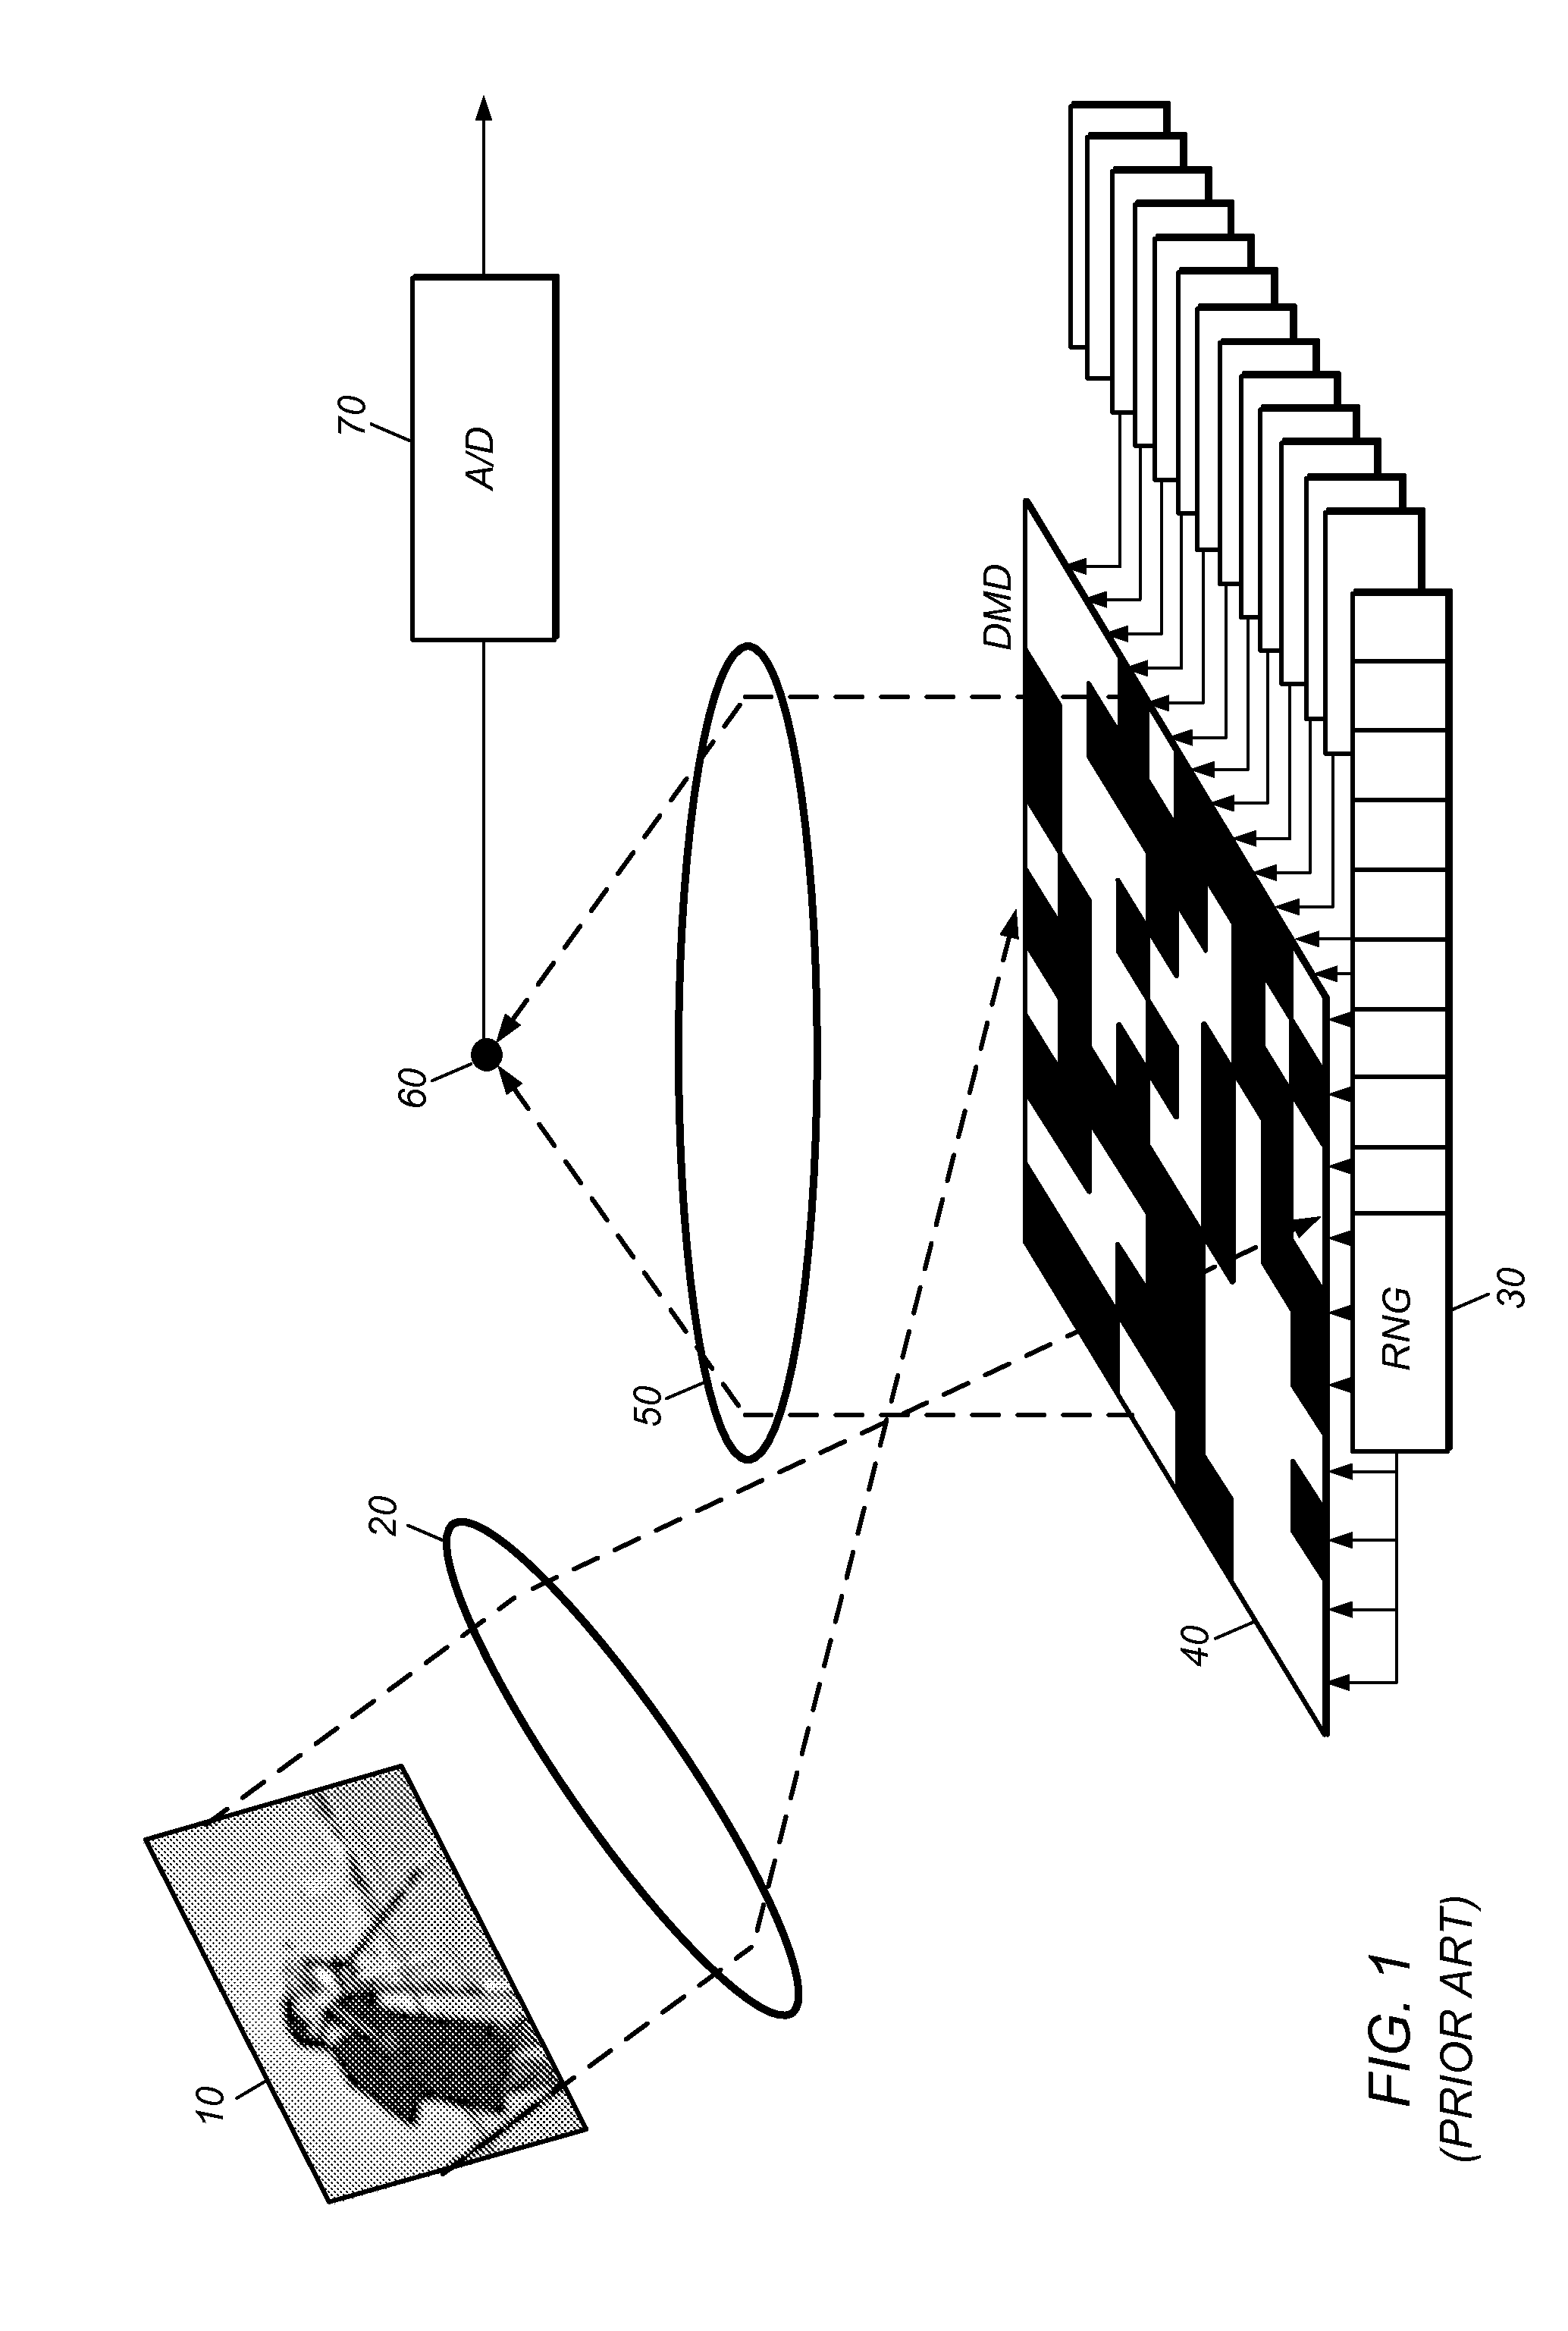 Mechanisms for Conserving Power in a Compressive Imaging System